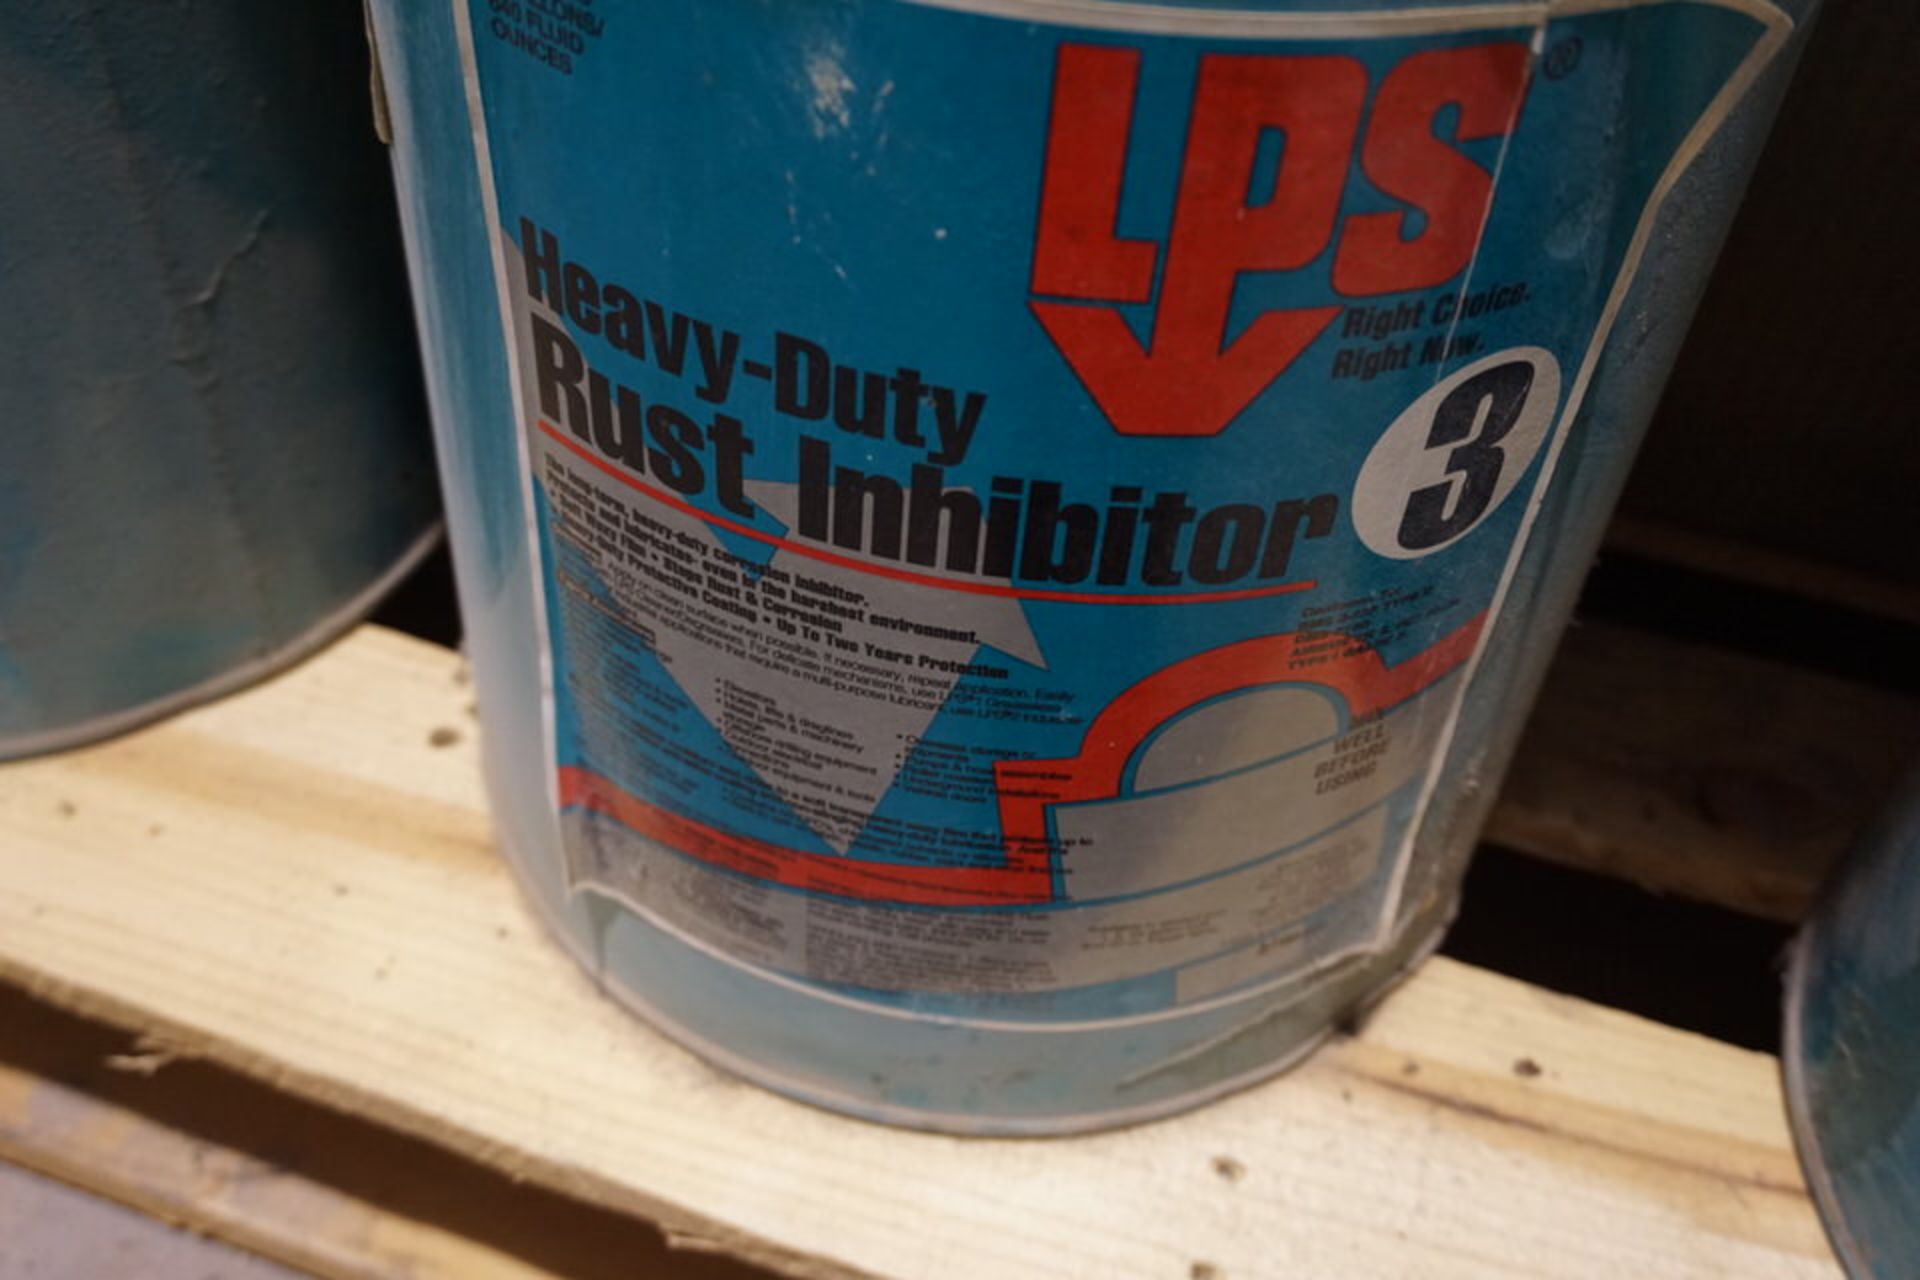 PLS RUST INHIBITOR, INDUSTRIAL CLEANER, 5 GALLON CANS, HAND CLEANER, CONTACT CLEANER, ANTI SPLATTER, - Image 3 of 5